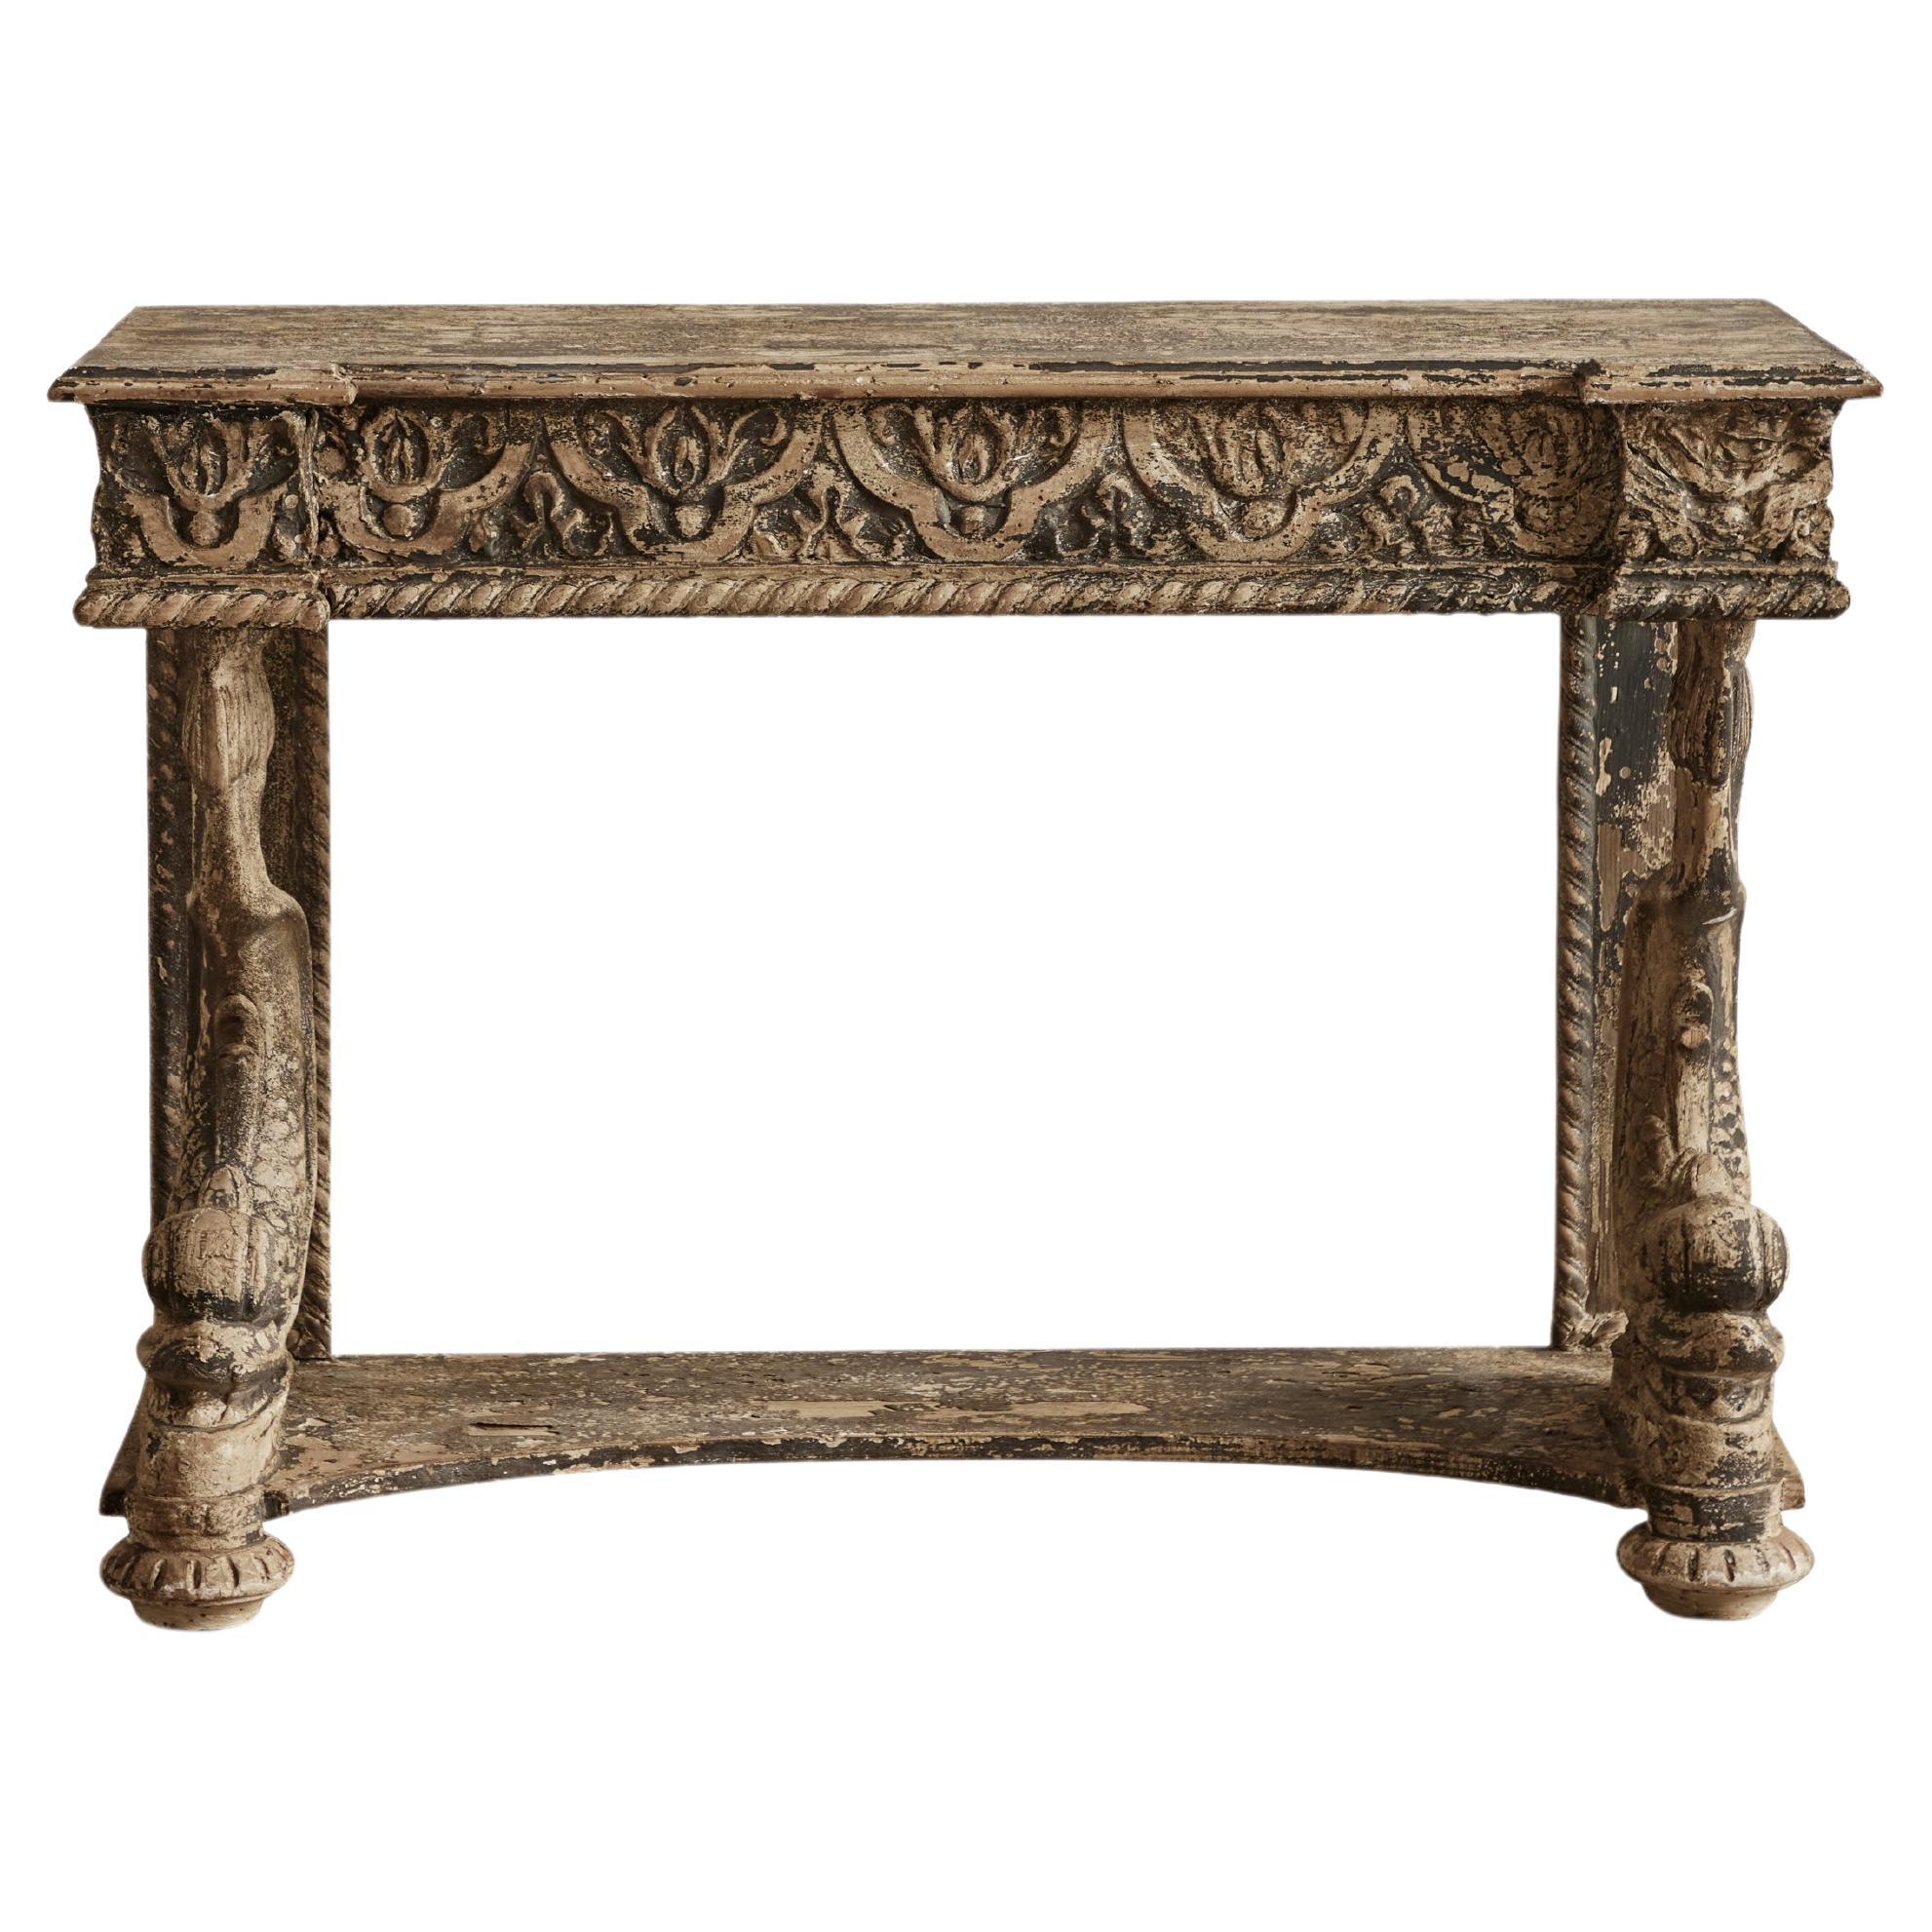 Pair of intricately carved renaissance style console tables from France circa 1970. Some visible wear throughout that is consistent with age and use.